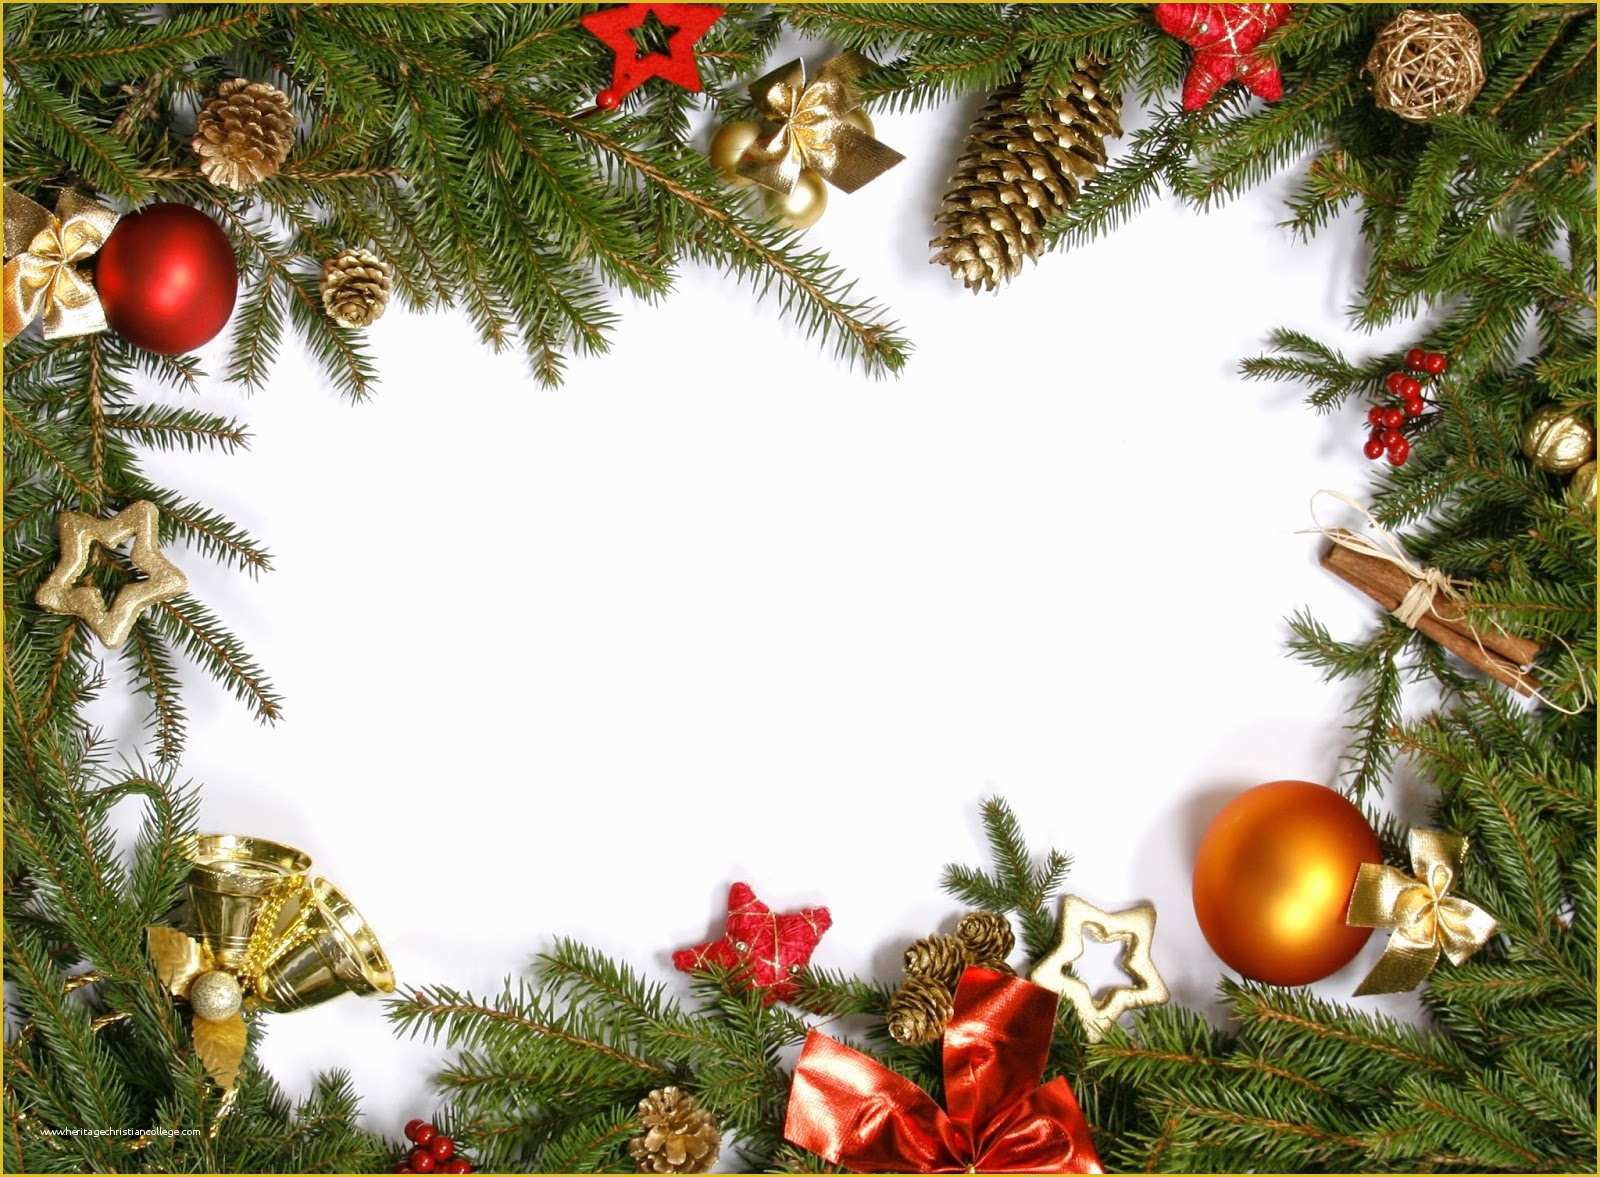 free-christmas-card-templates-for-photoshop-of-1000-ideas-about-christmas-card-templates-on